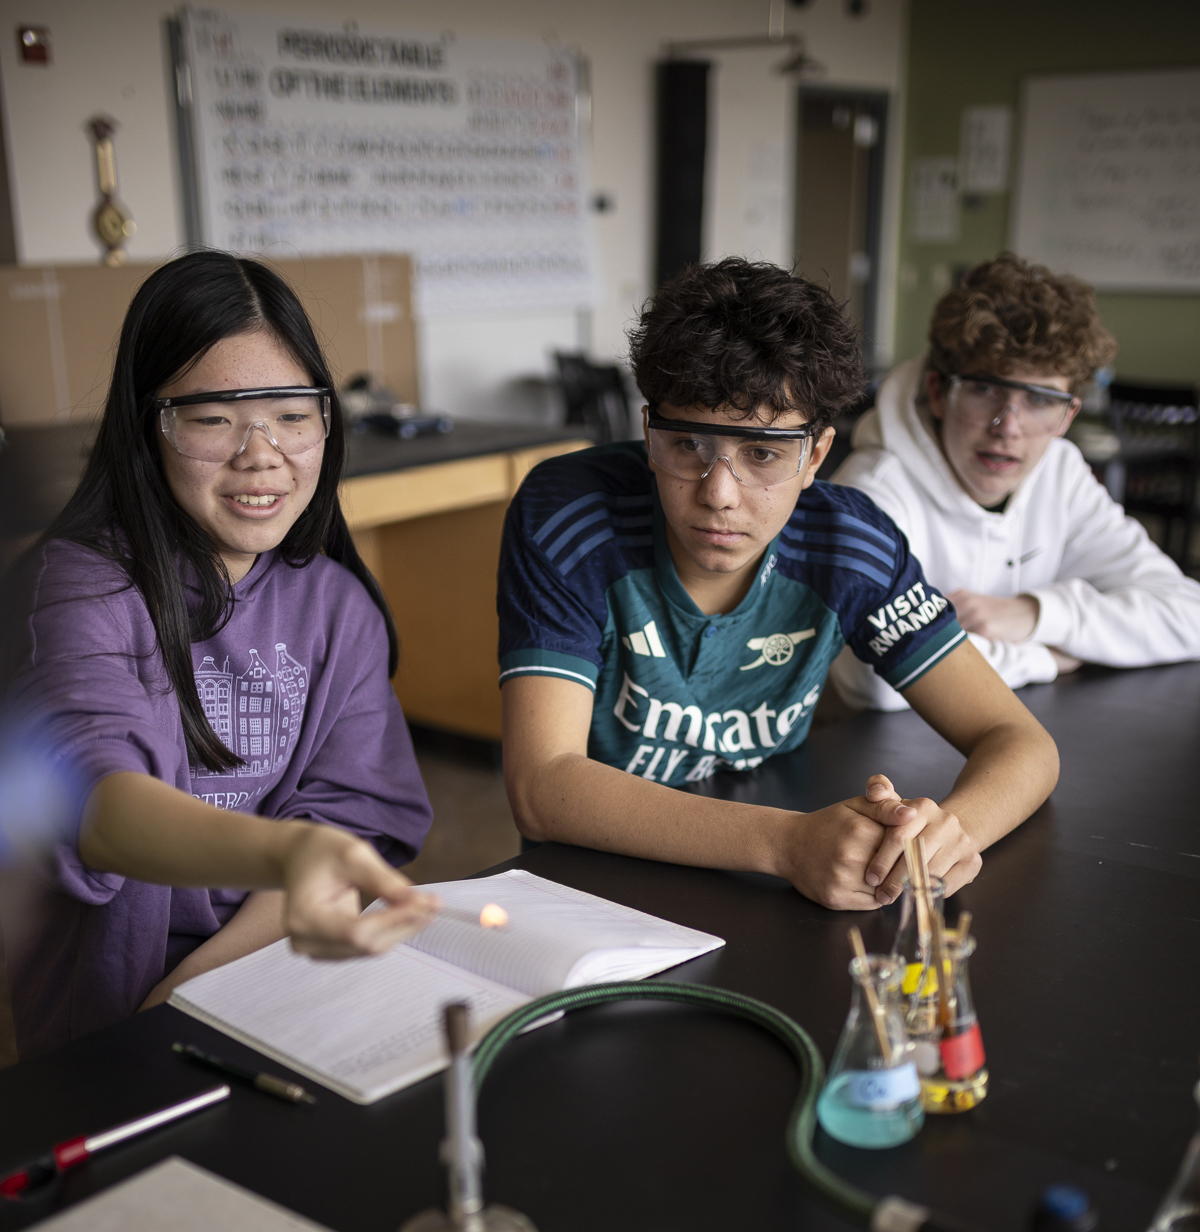 students learning in a science classroom